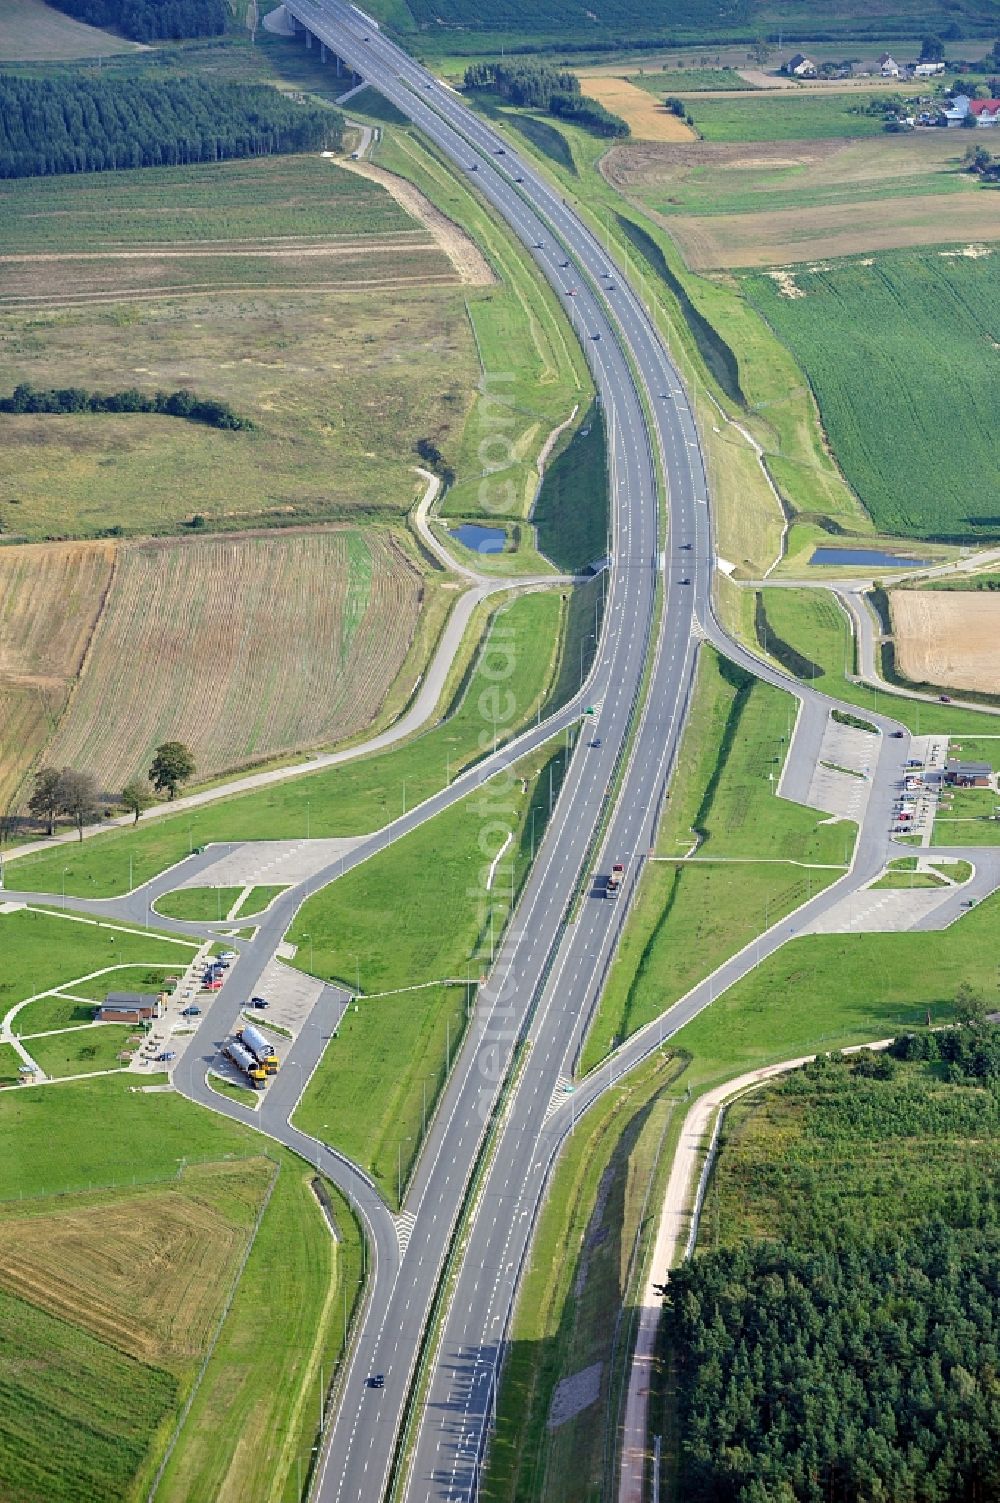 Aerial photograph Pszczó?ki / Hohenstein - View of a rest area on highway A1 in the province of Pommern